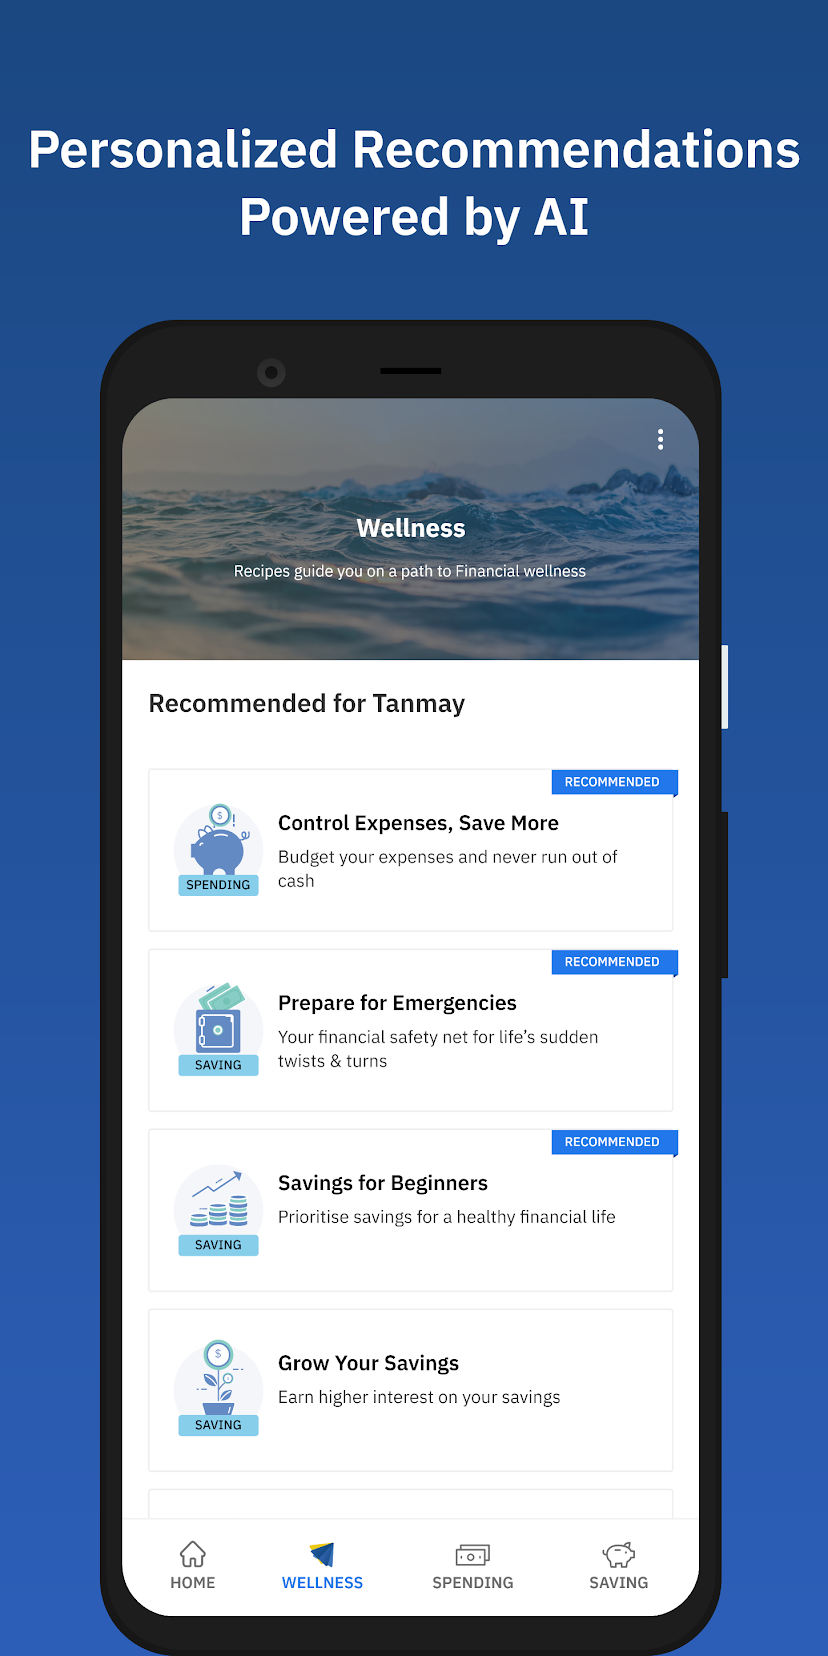 Wizely - Personal Finance management app